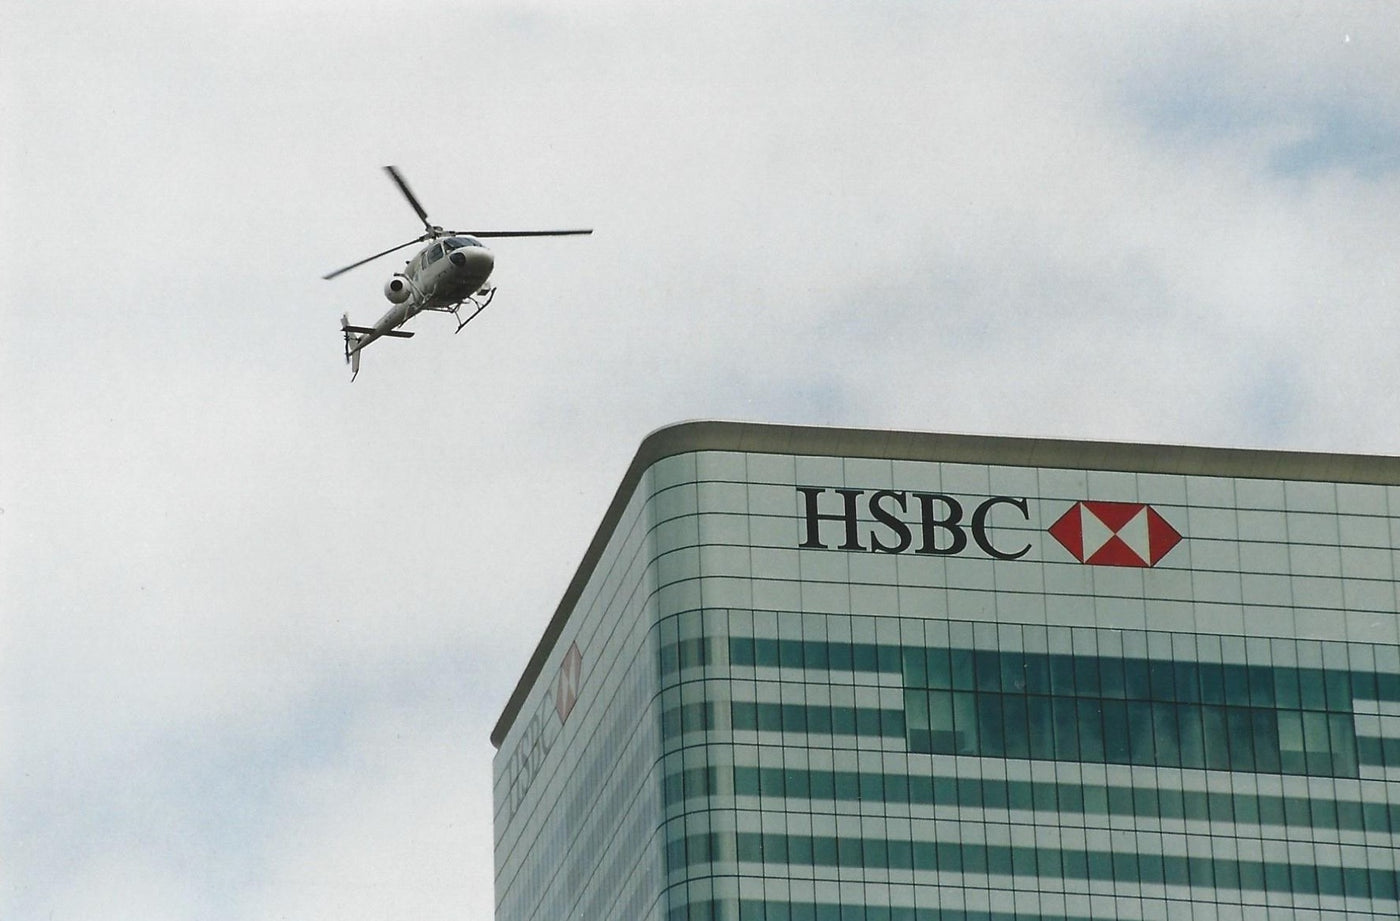 HSBC Canary Wharf HQ helicopter photograph